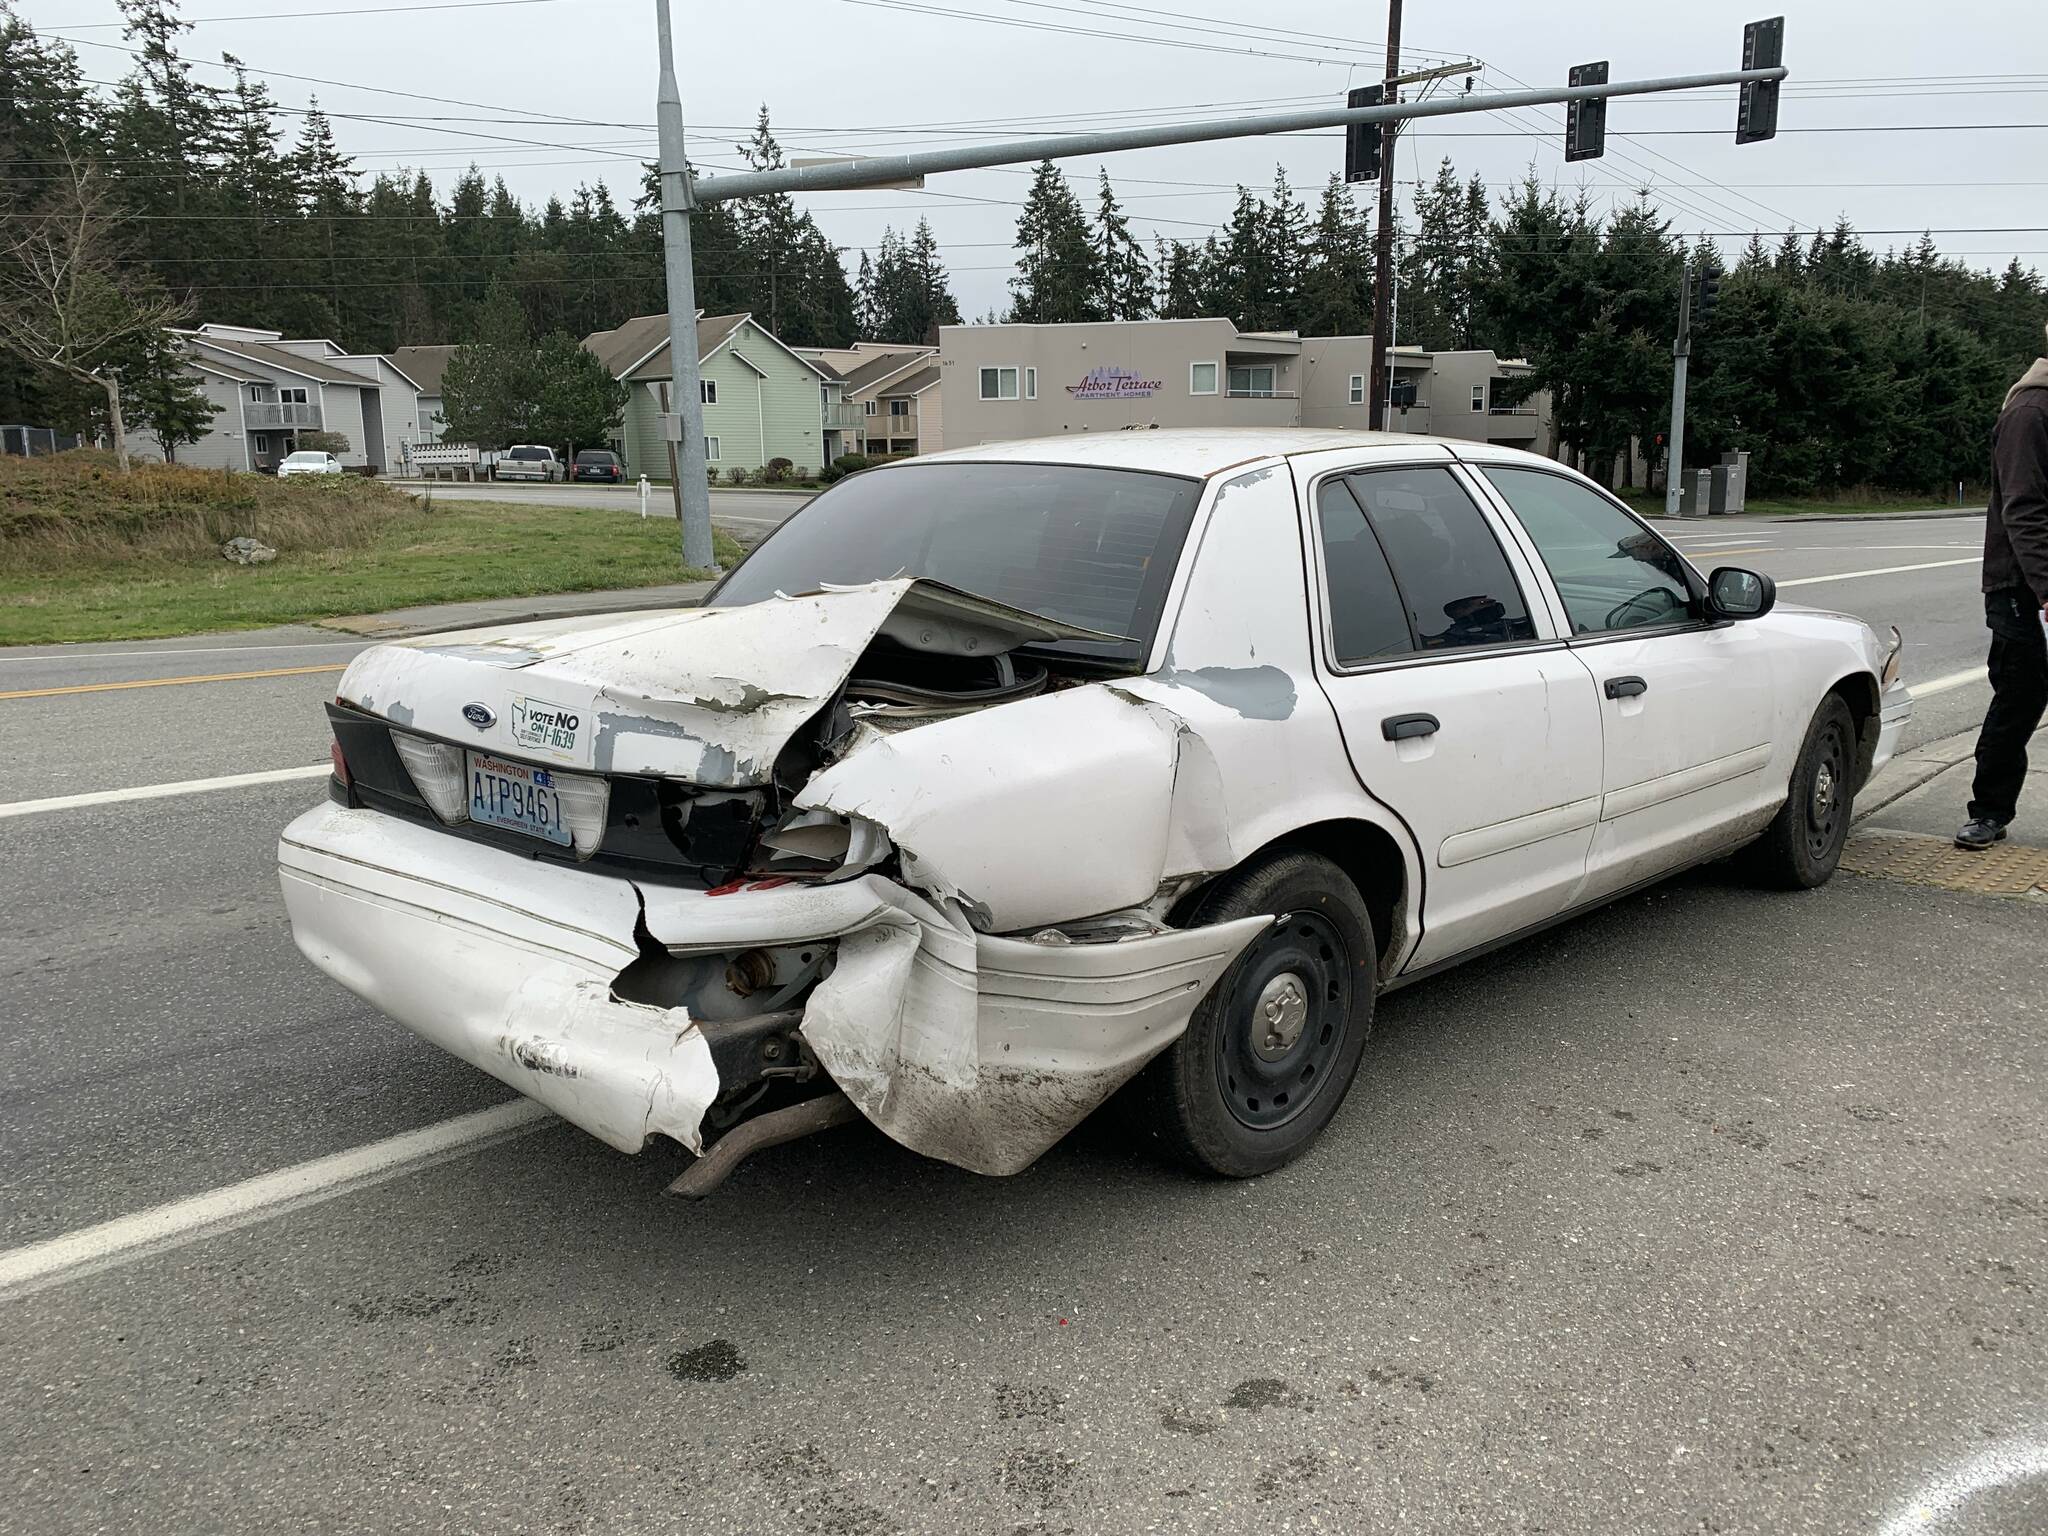 A car was damaged in a 2022 crash involving a police officer. (City of Oak Harbor image)